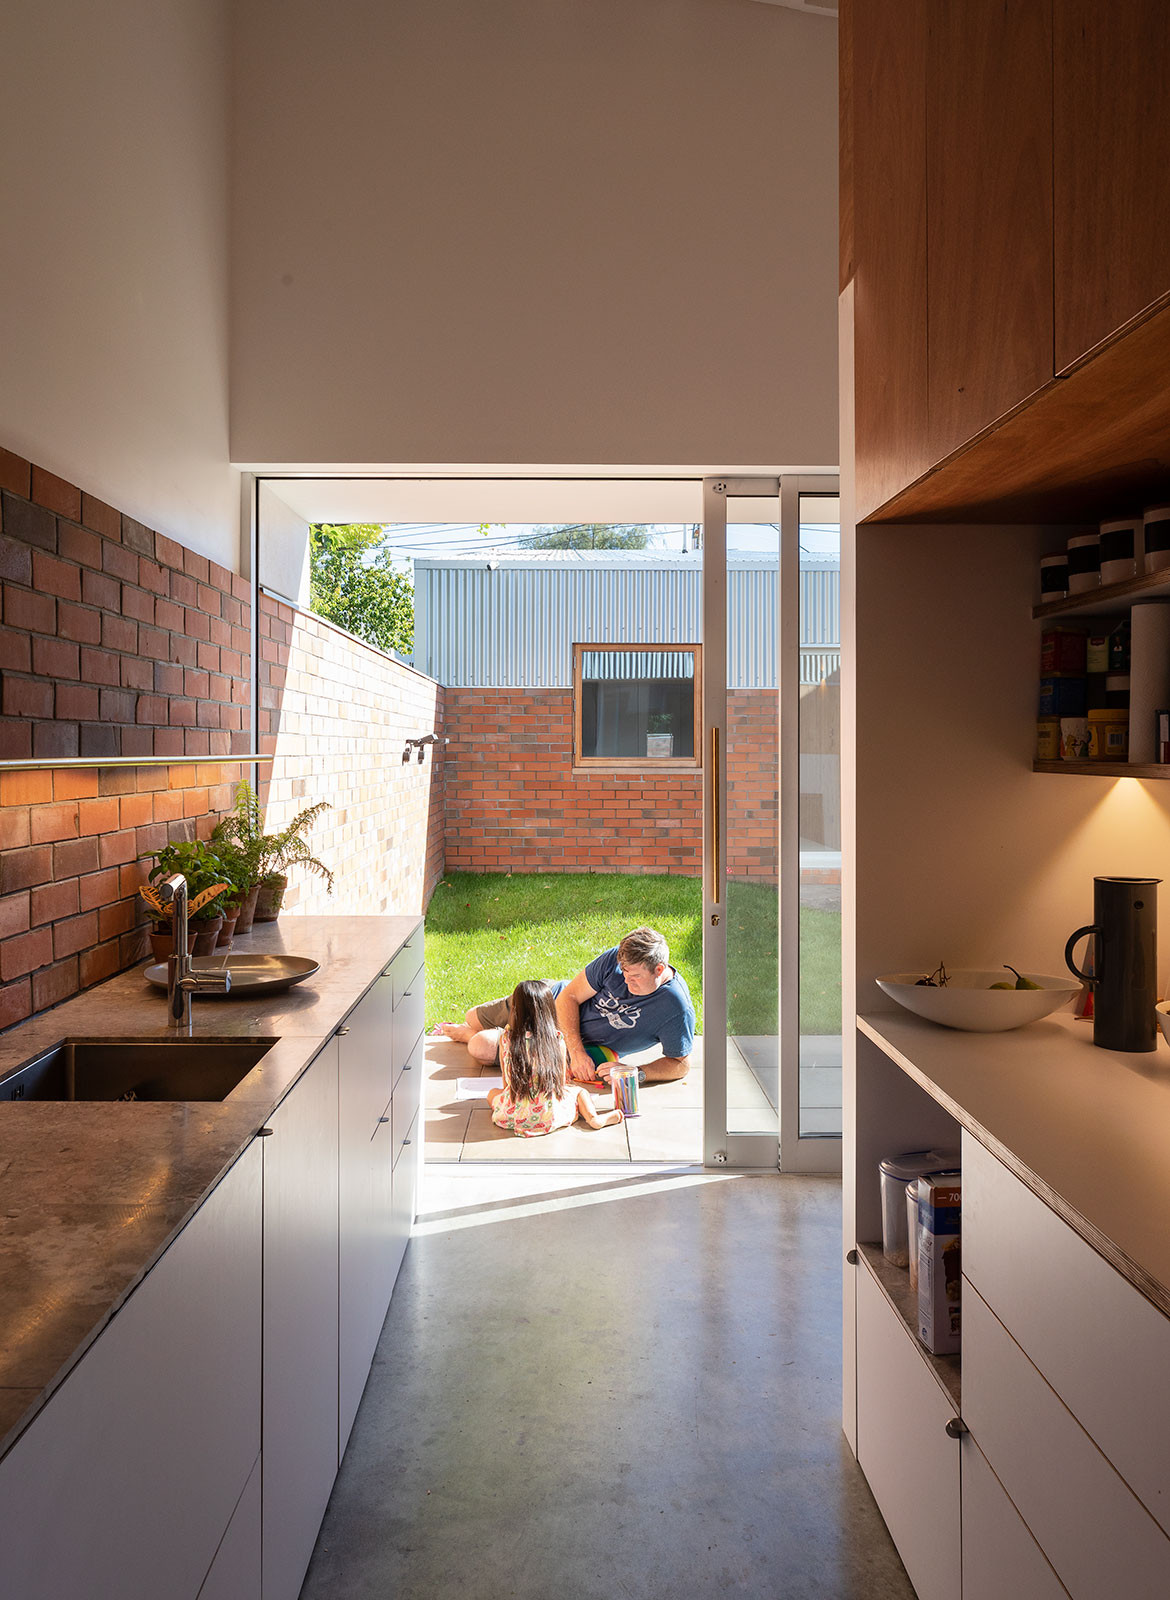 House In Town Christopher Beer Architects CC Patrick Reynolds kitchen outdoor space opening